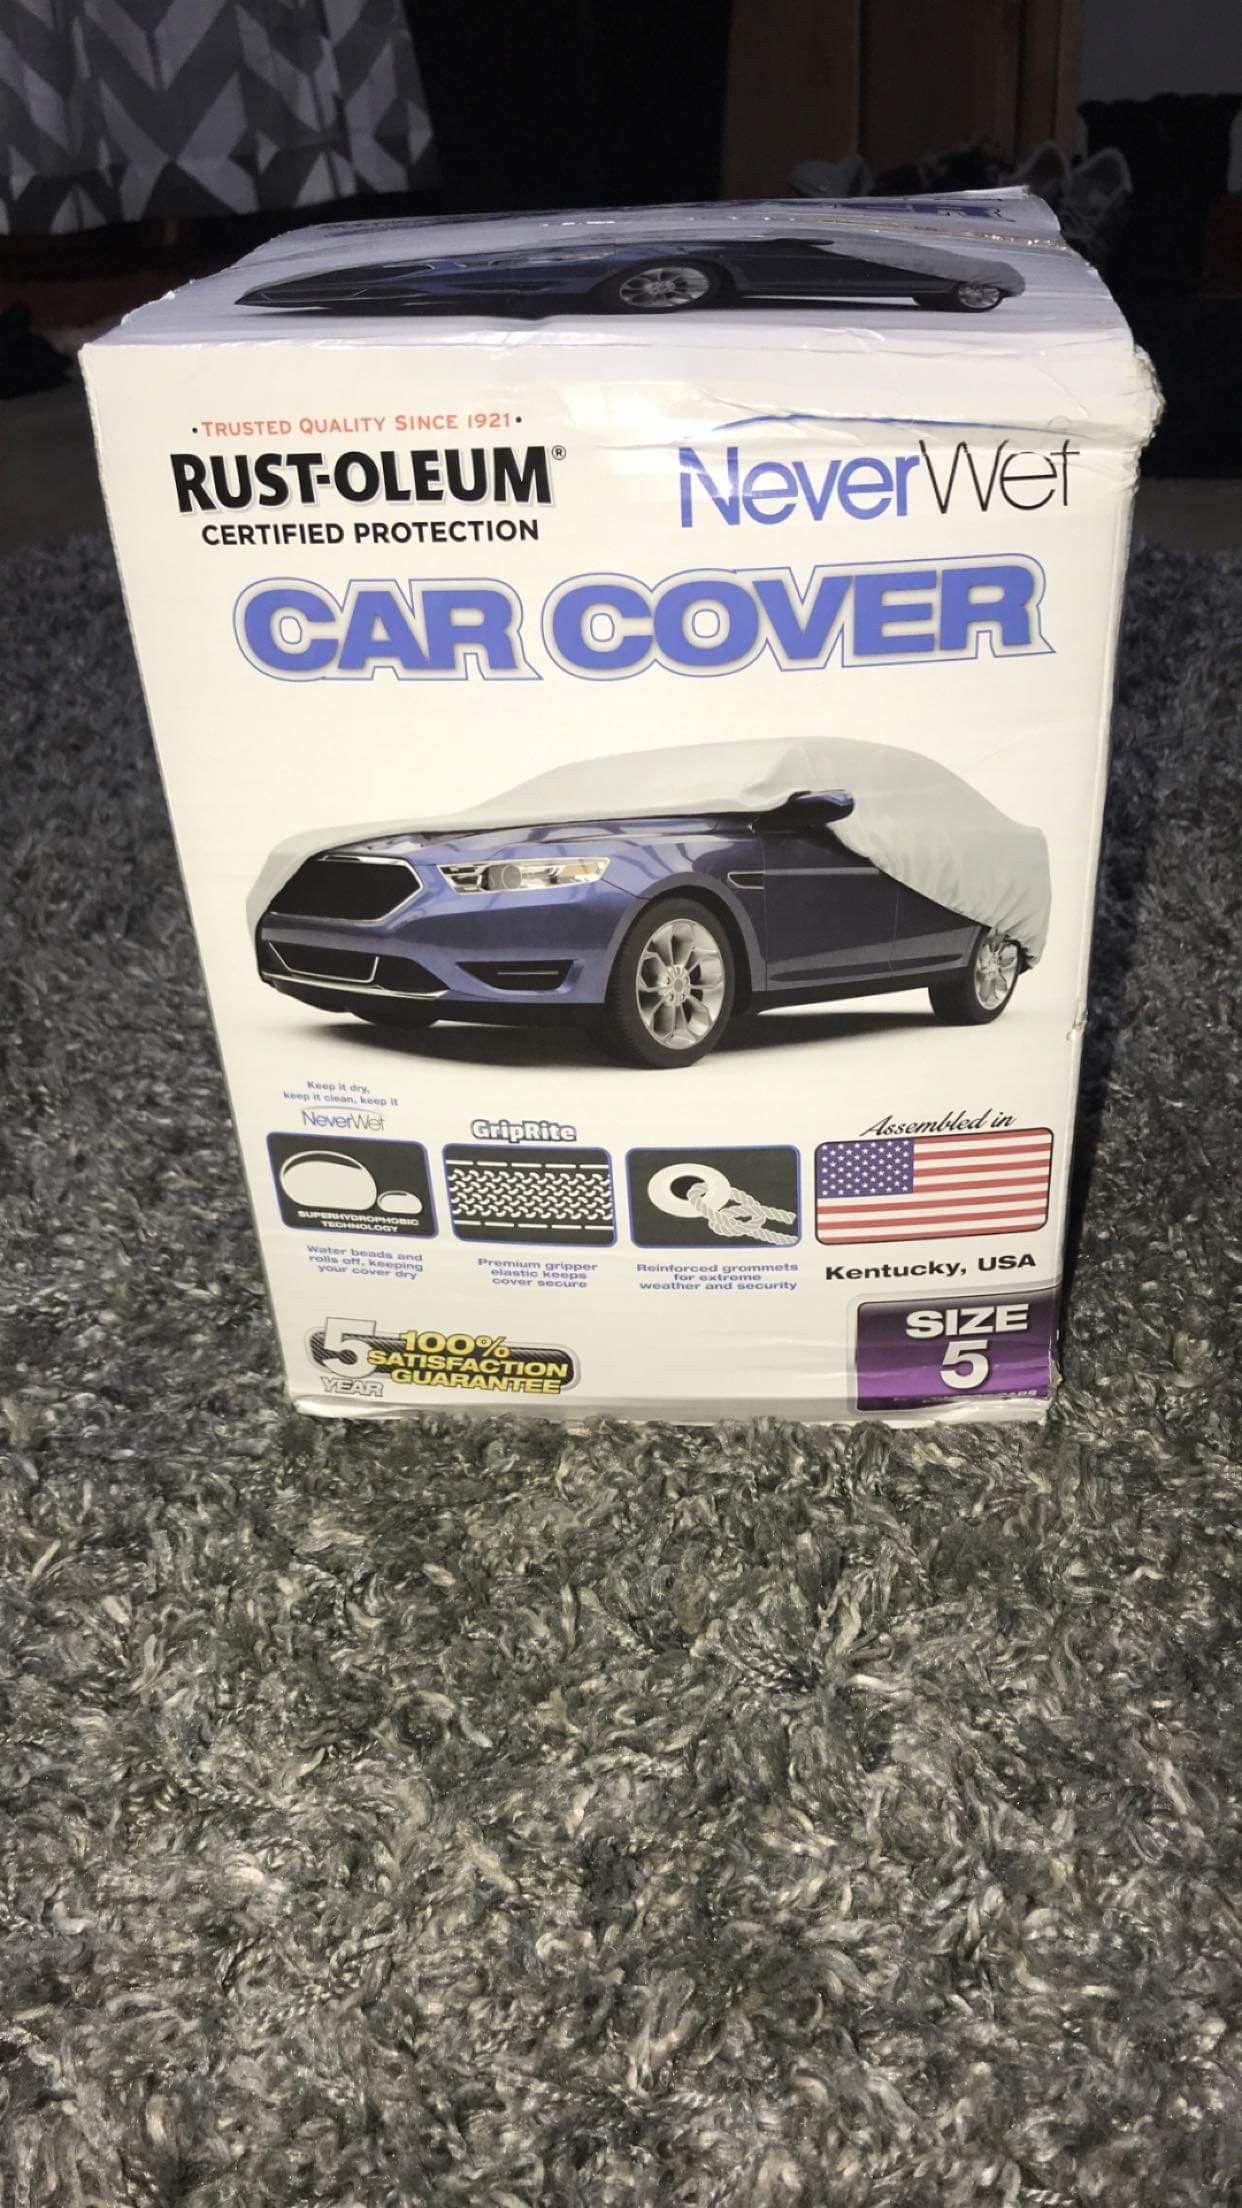 Rust oleum car cover size 5 extra large vehicles. BRAND NEW